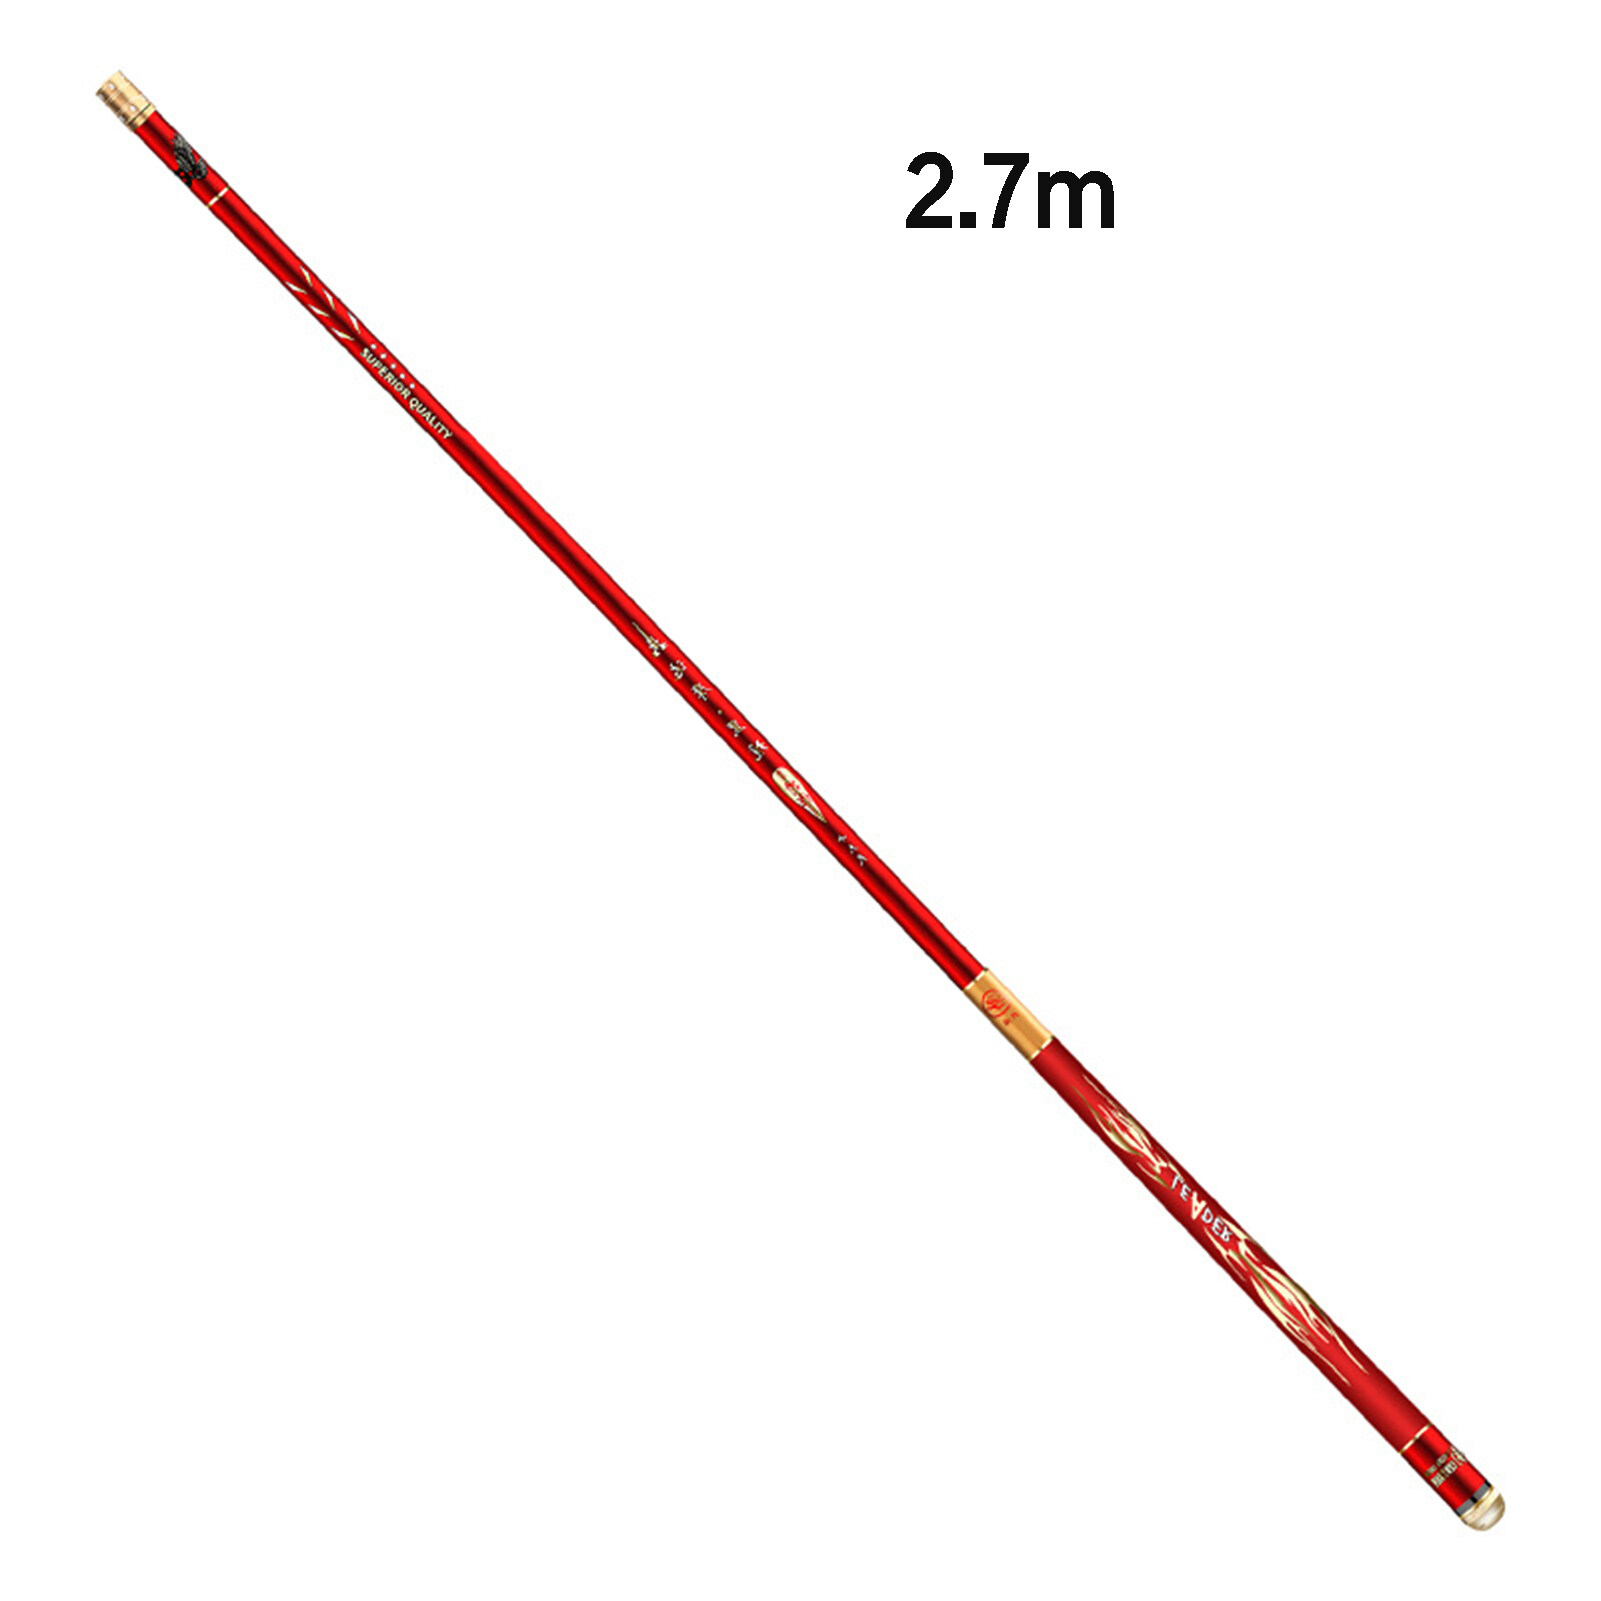 Angling Rods Hand Fishing Rods Comfortable Hand Feeling for Freshwater